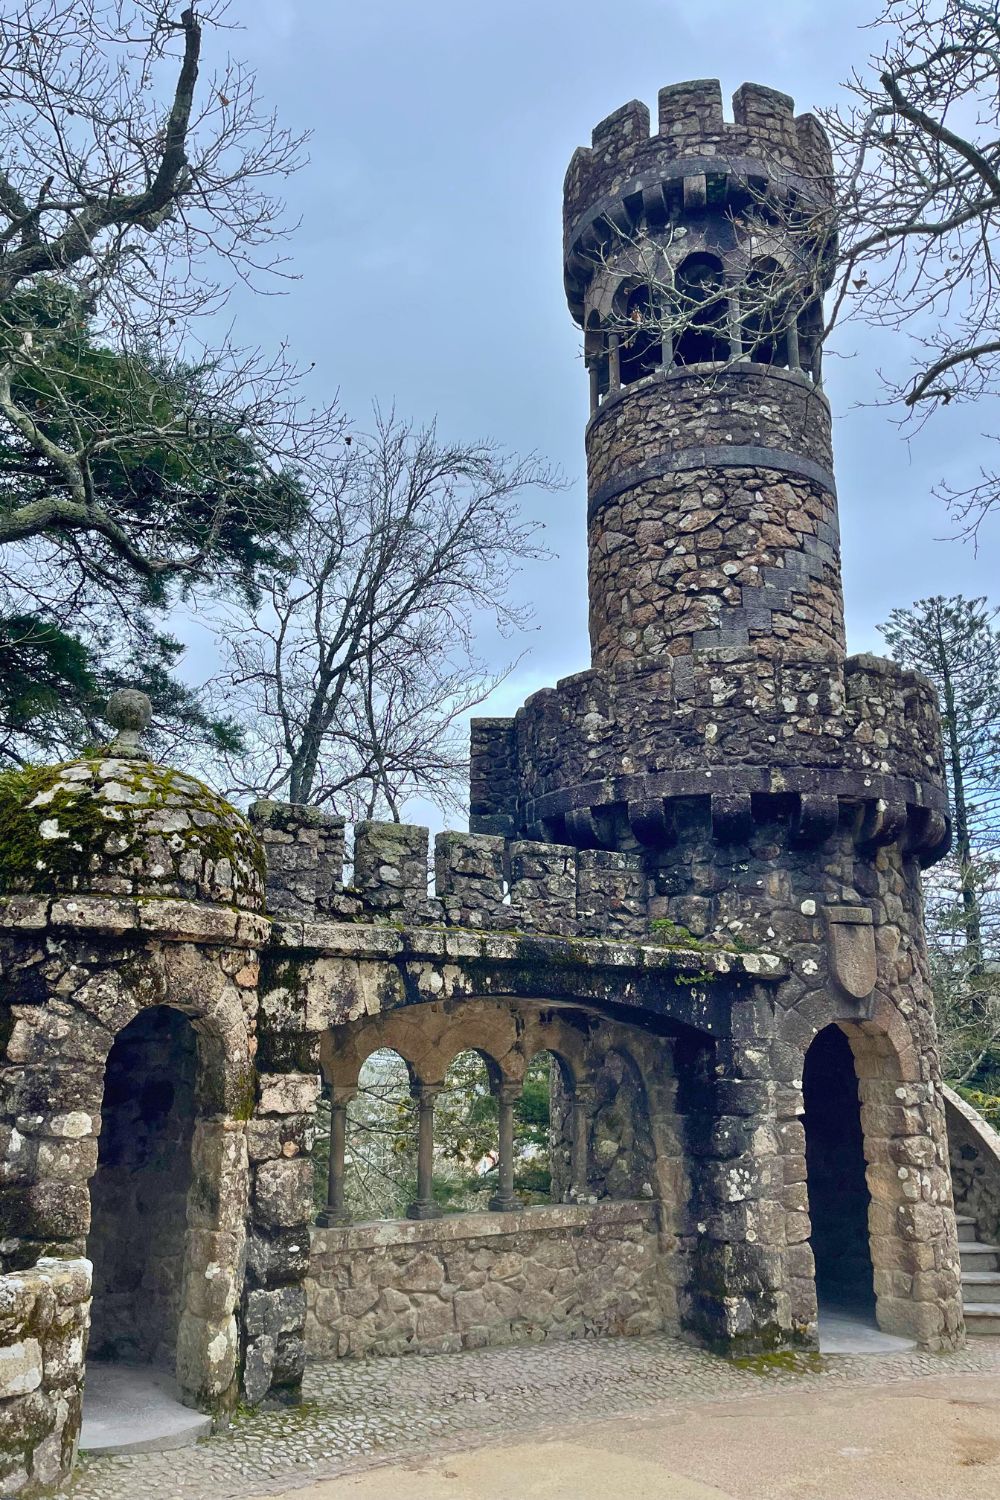 A rustic stone turret with a crenelated top stands guard over a stone archway, evoking a sense of medieval history. The turret is adorned with moss, suggesting age and the merging of nature with architecture, set against a backdrop of bare winter trees.